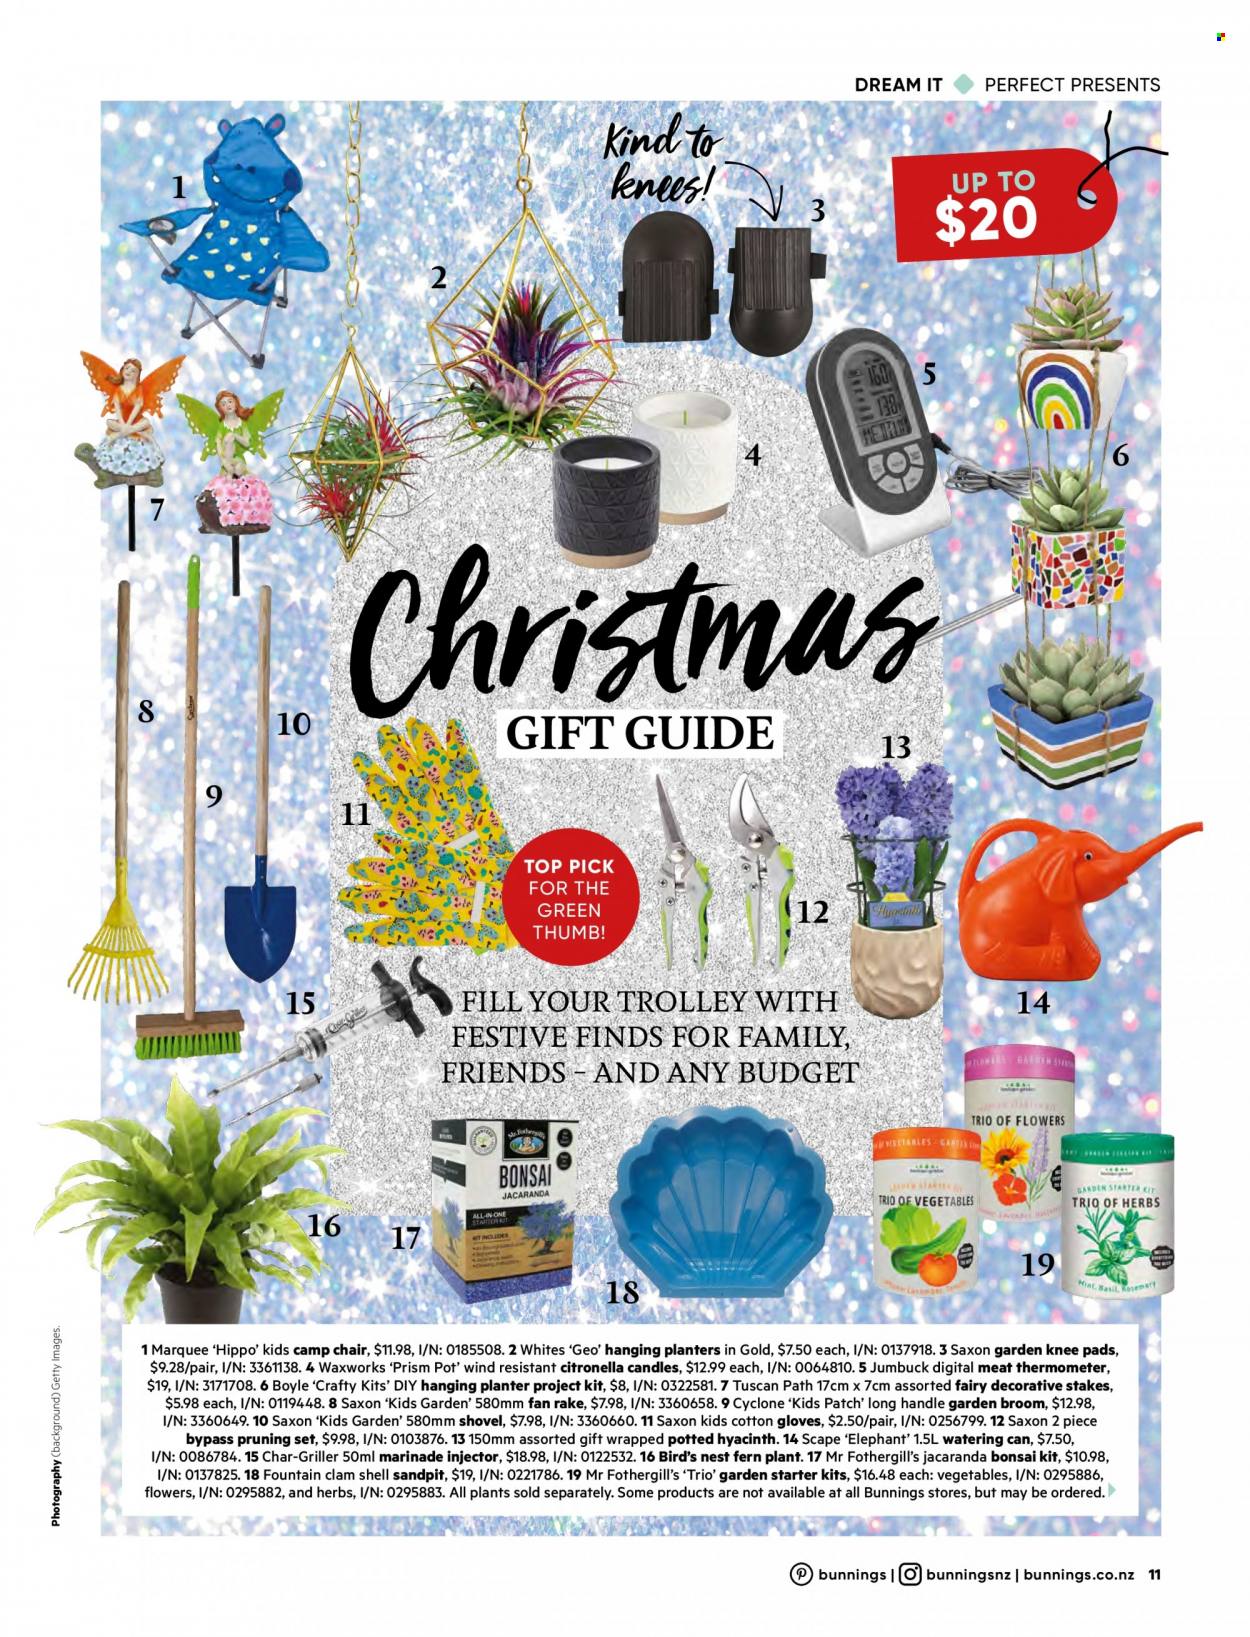 thumbnail - Bunnings Warehouse mailer - Sales products - chair, hanging planter, marinade, Fairy, thermometer, gloves, broom, pot, meat thermometer, candle, shovel, knee pads, watering can, hyacinth, herbs, bonsai tree. Page 11.